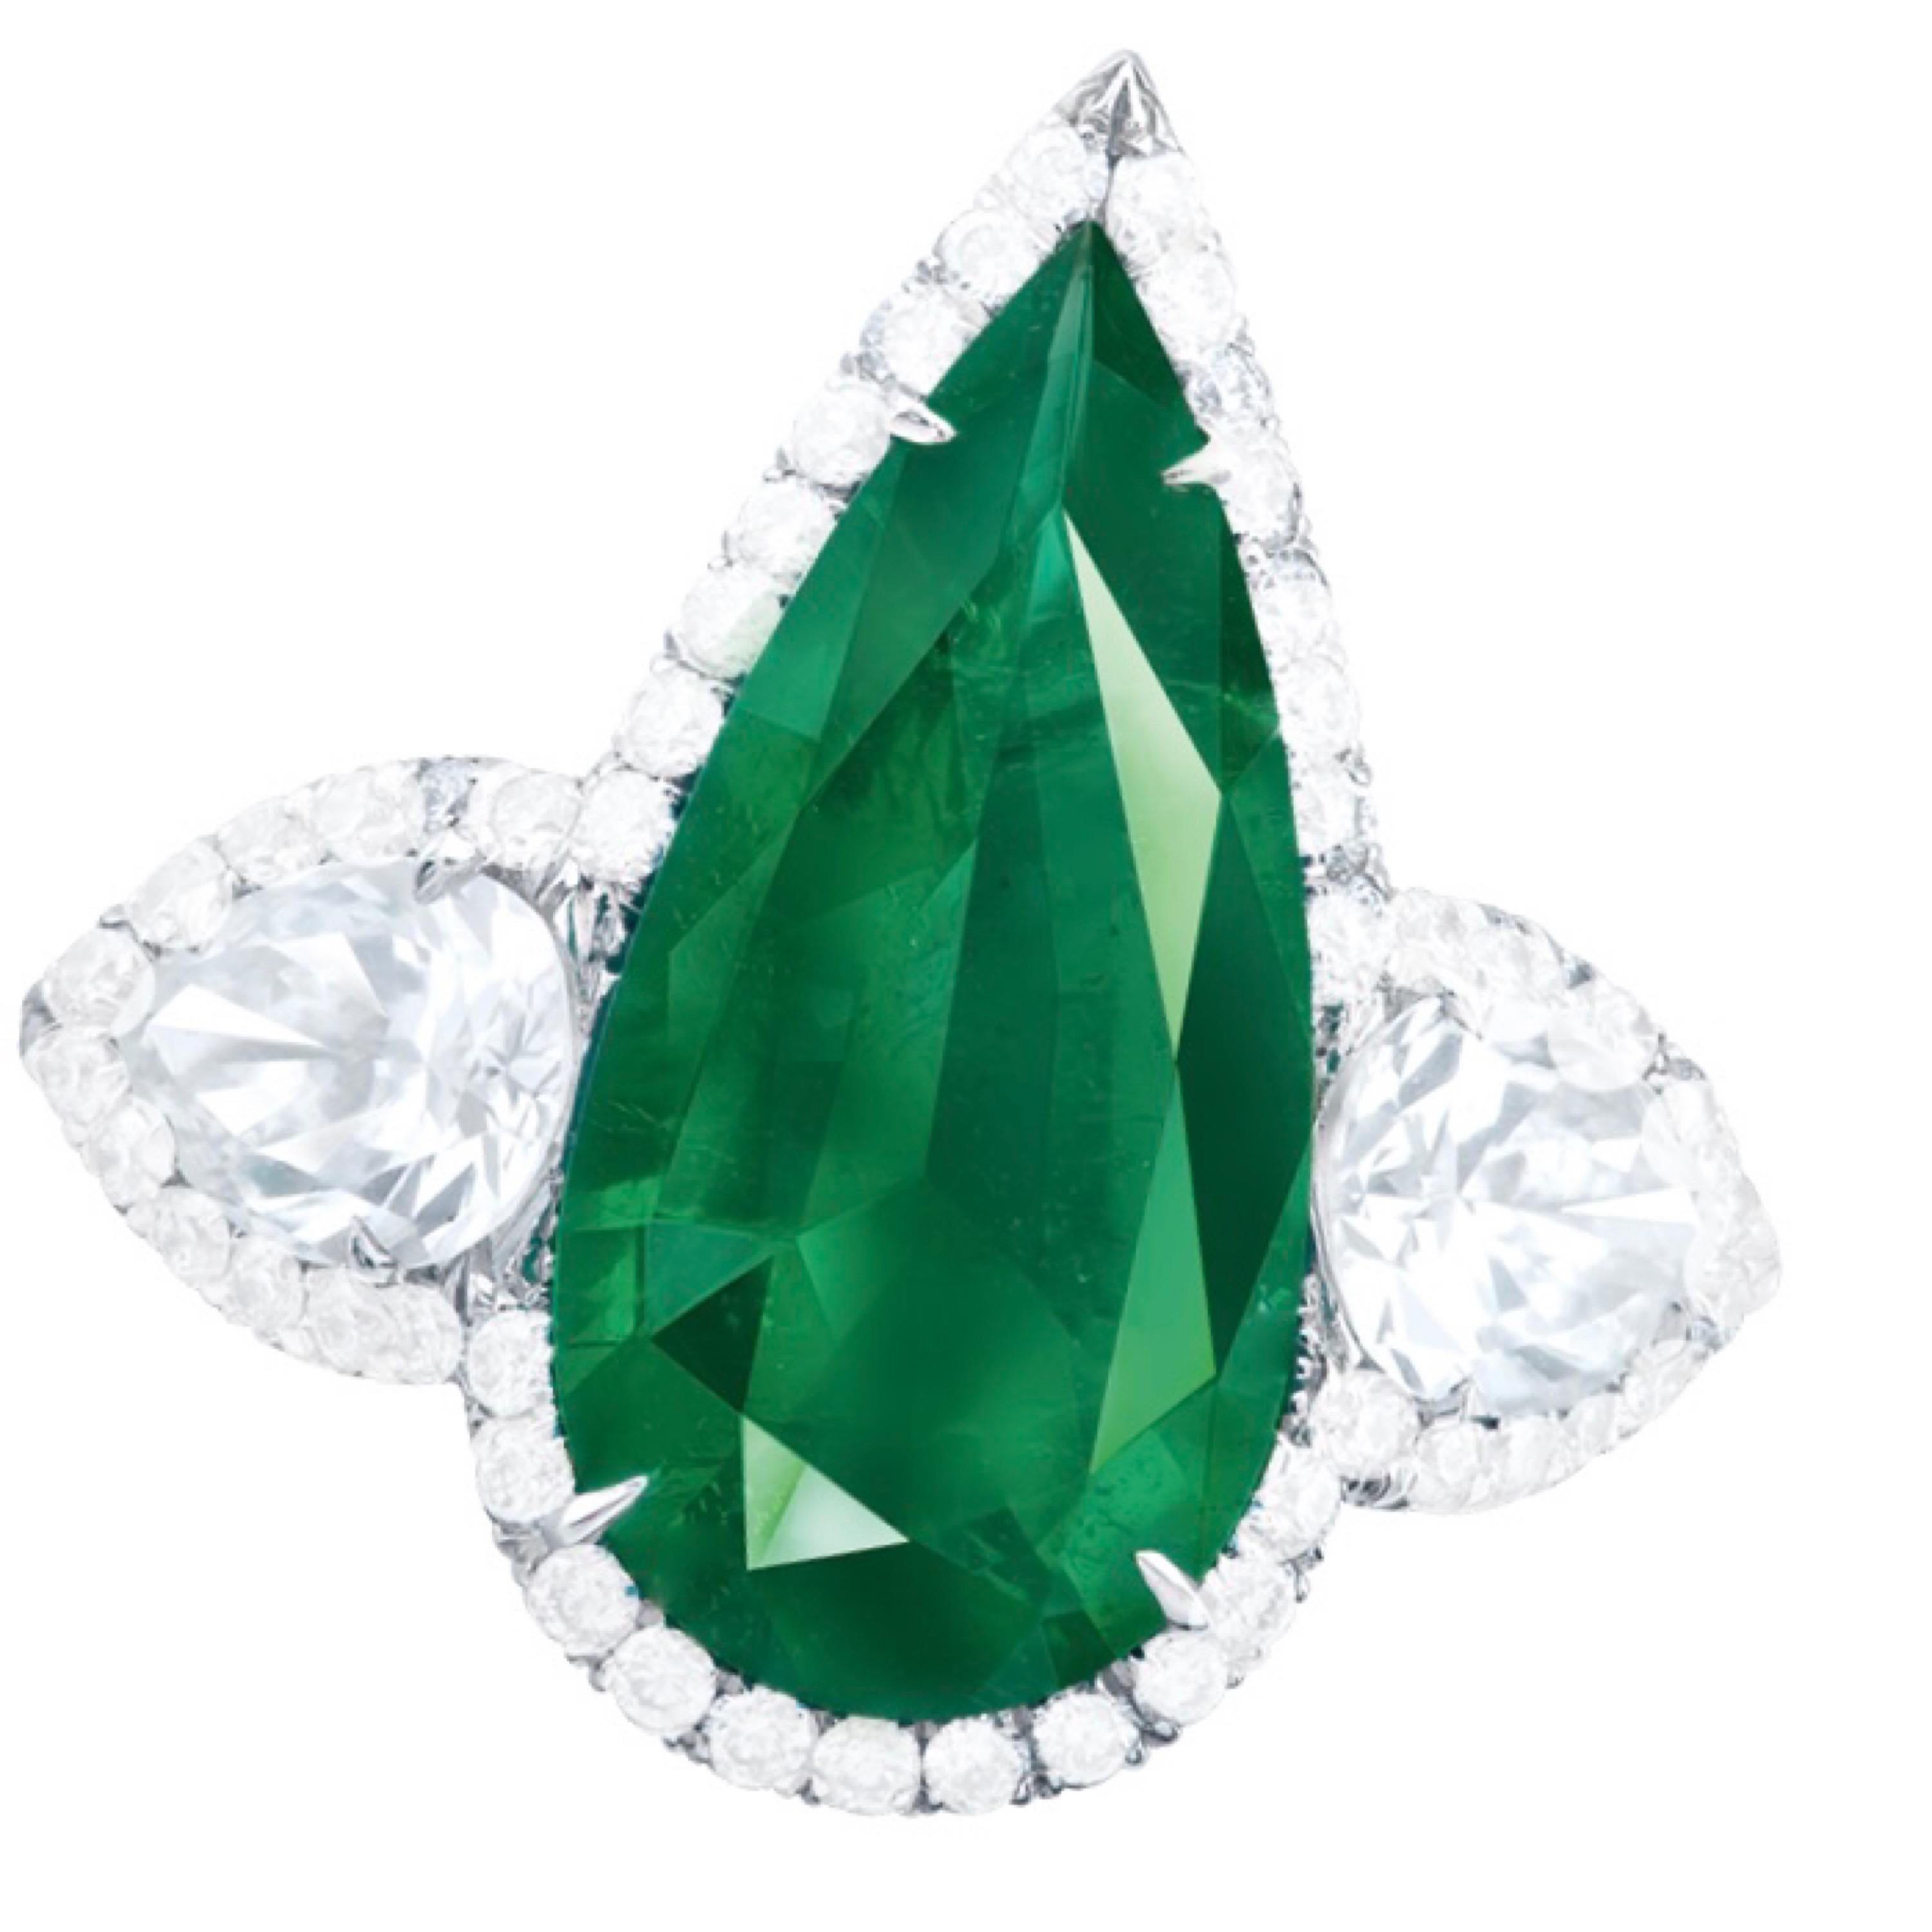 From the Emilio Jewelry Museum Vault, Showcasing a magnificent investment grade center pear shape emerald weighing 2.60 carats. The emerald is certified by AGL as a Colombian untreated No Oil natural stone. 
We are experts at creating jewels for